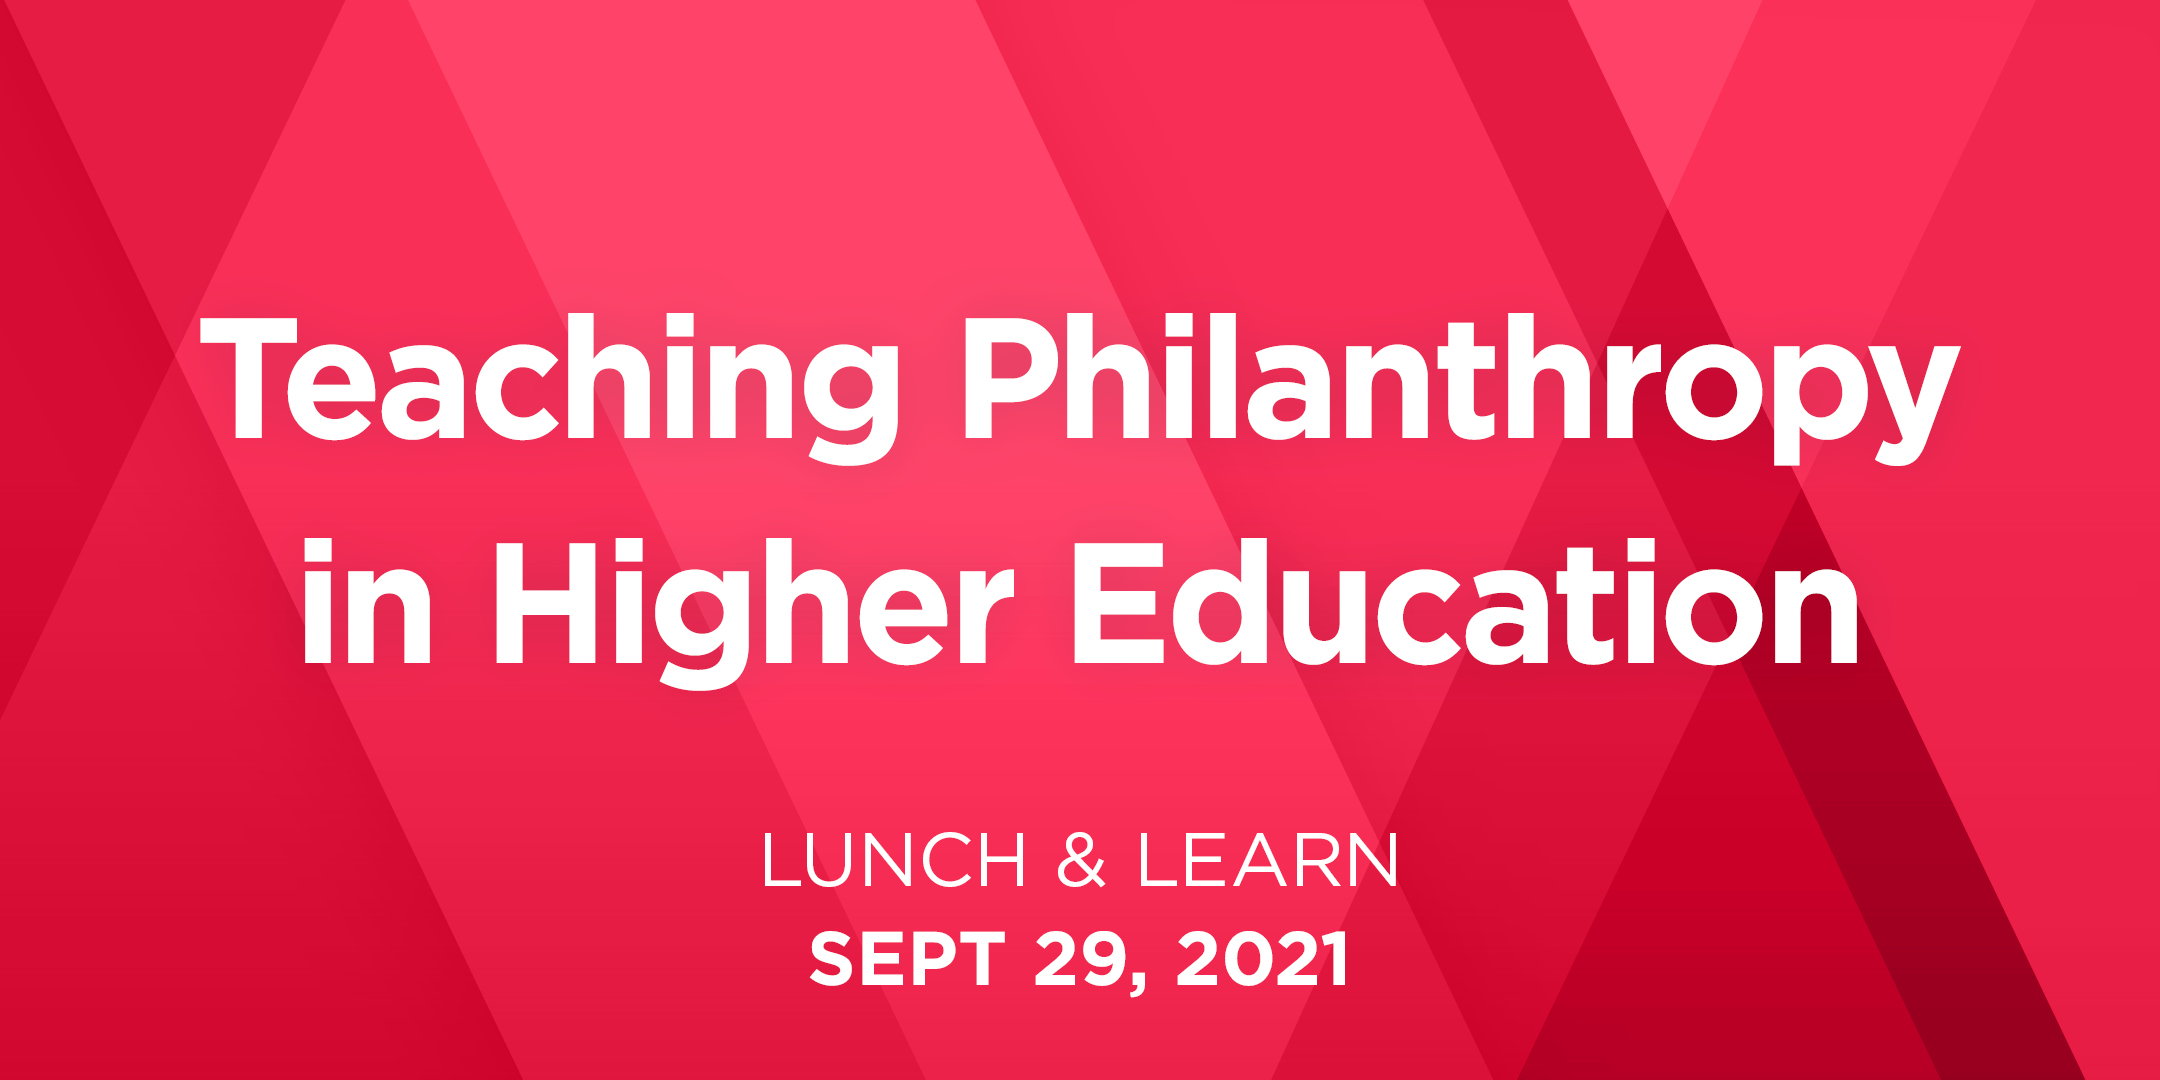 Lunch & Learn: Teaching Philanthropy in Higher Education